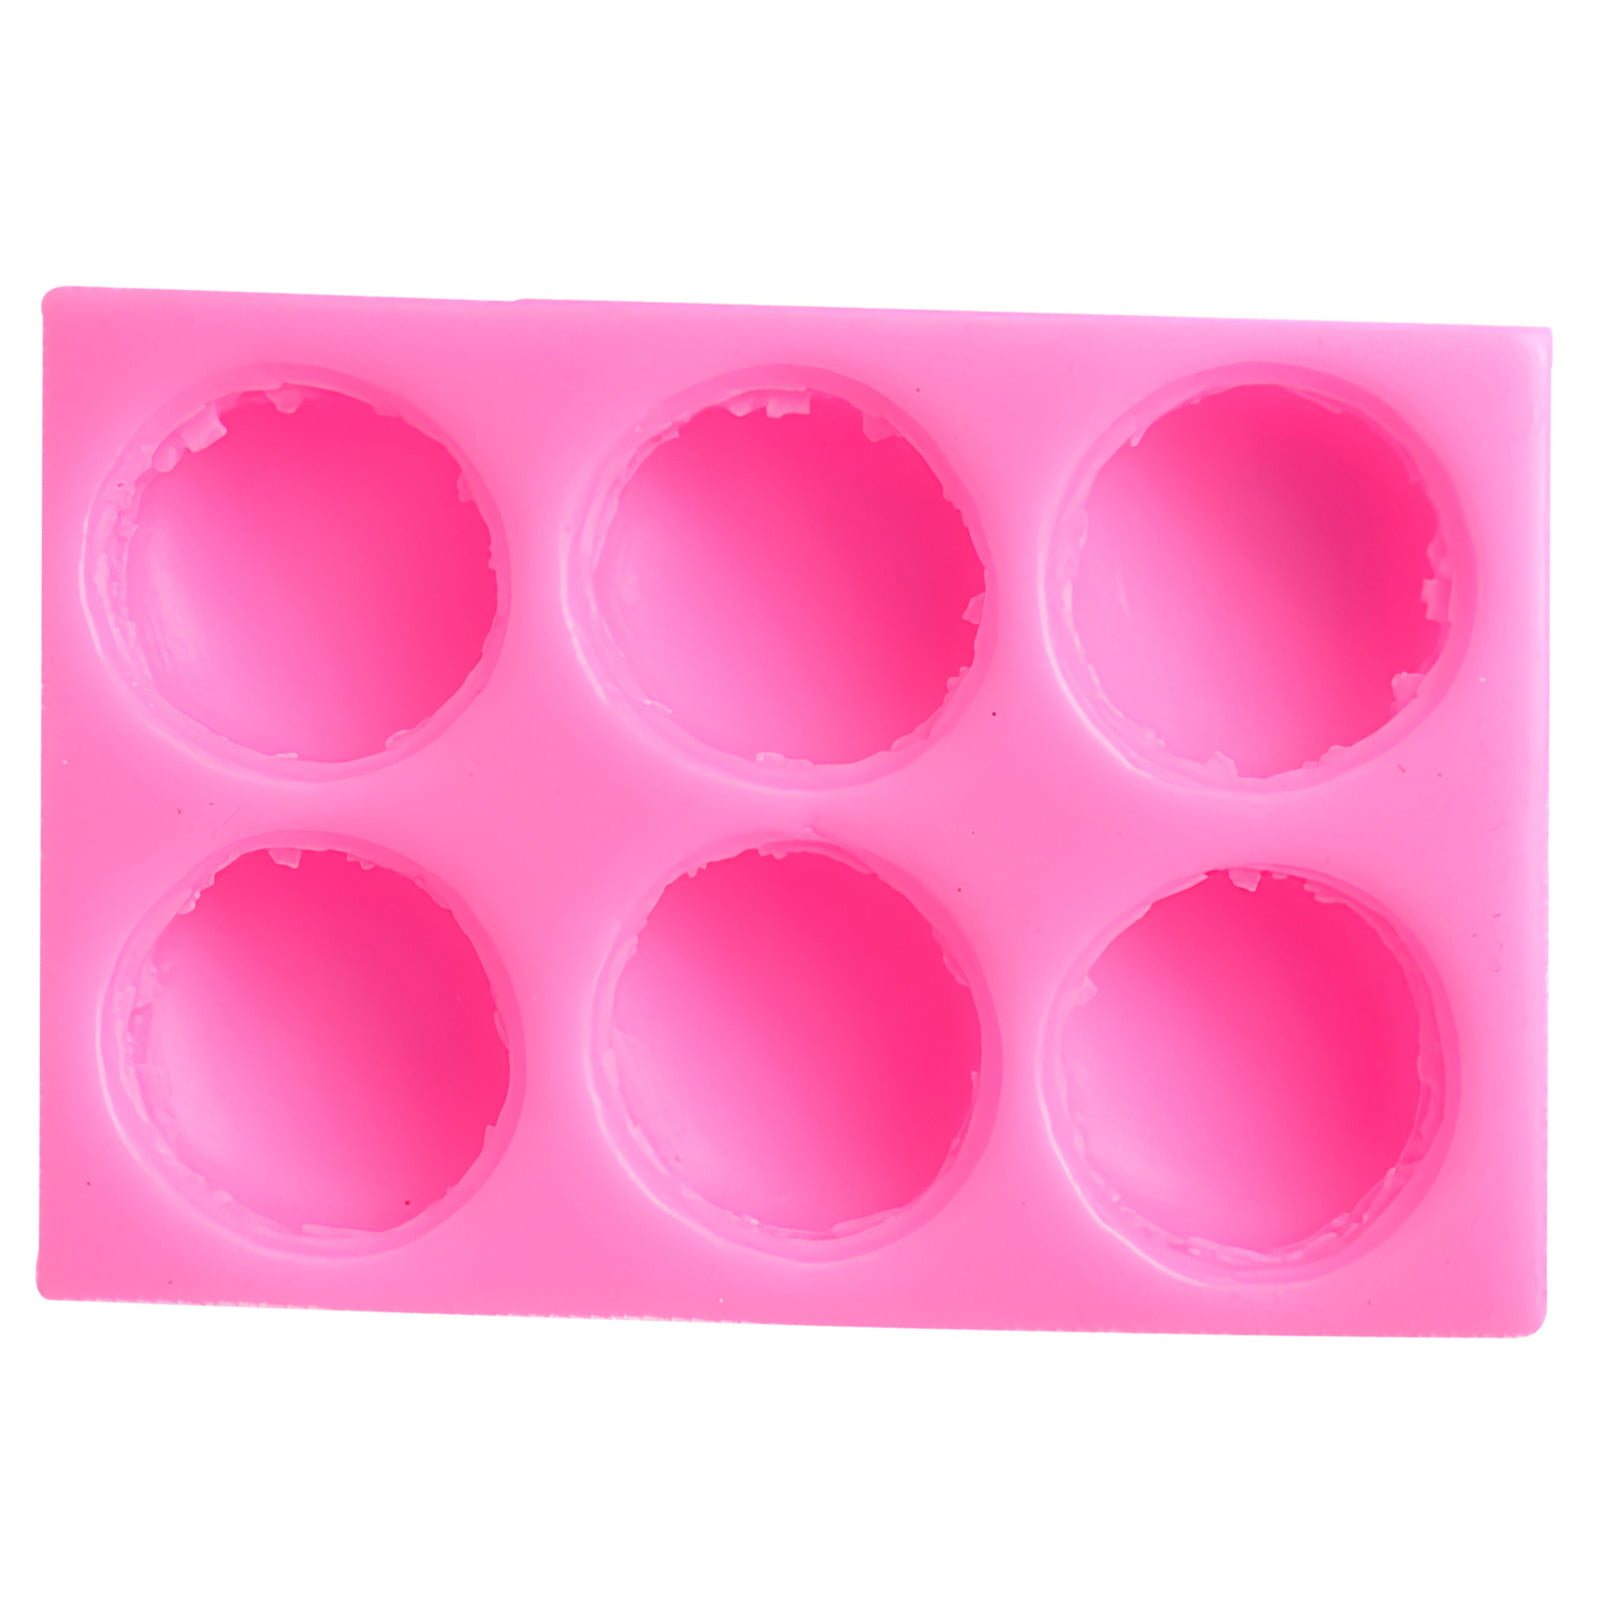 6 set Silicone Mold for Soap and Candles Macaron